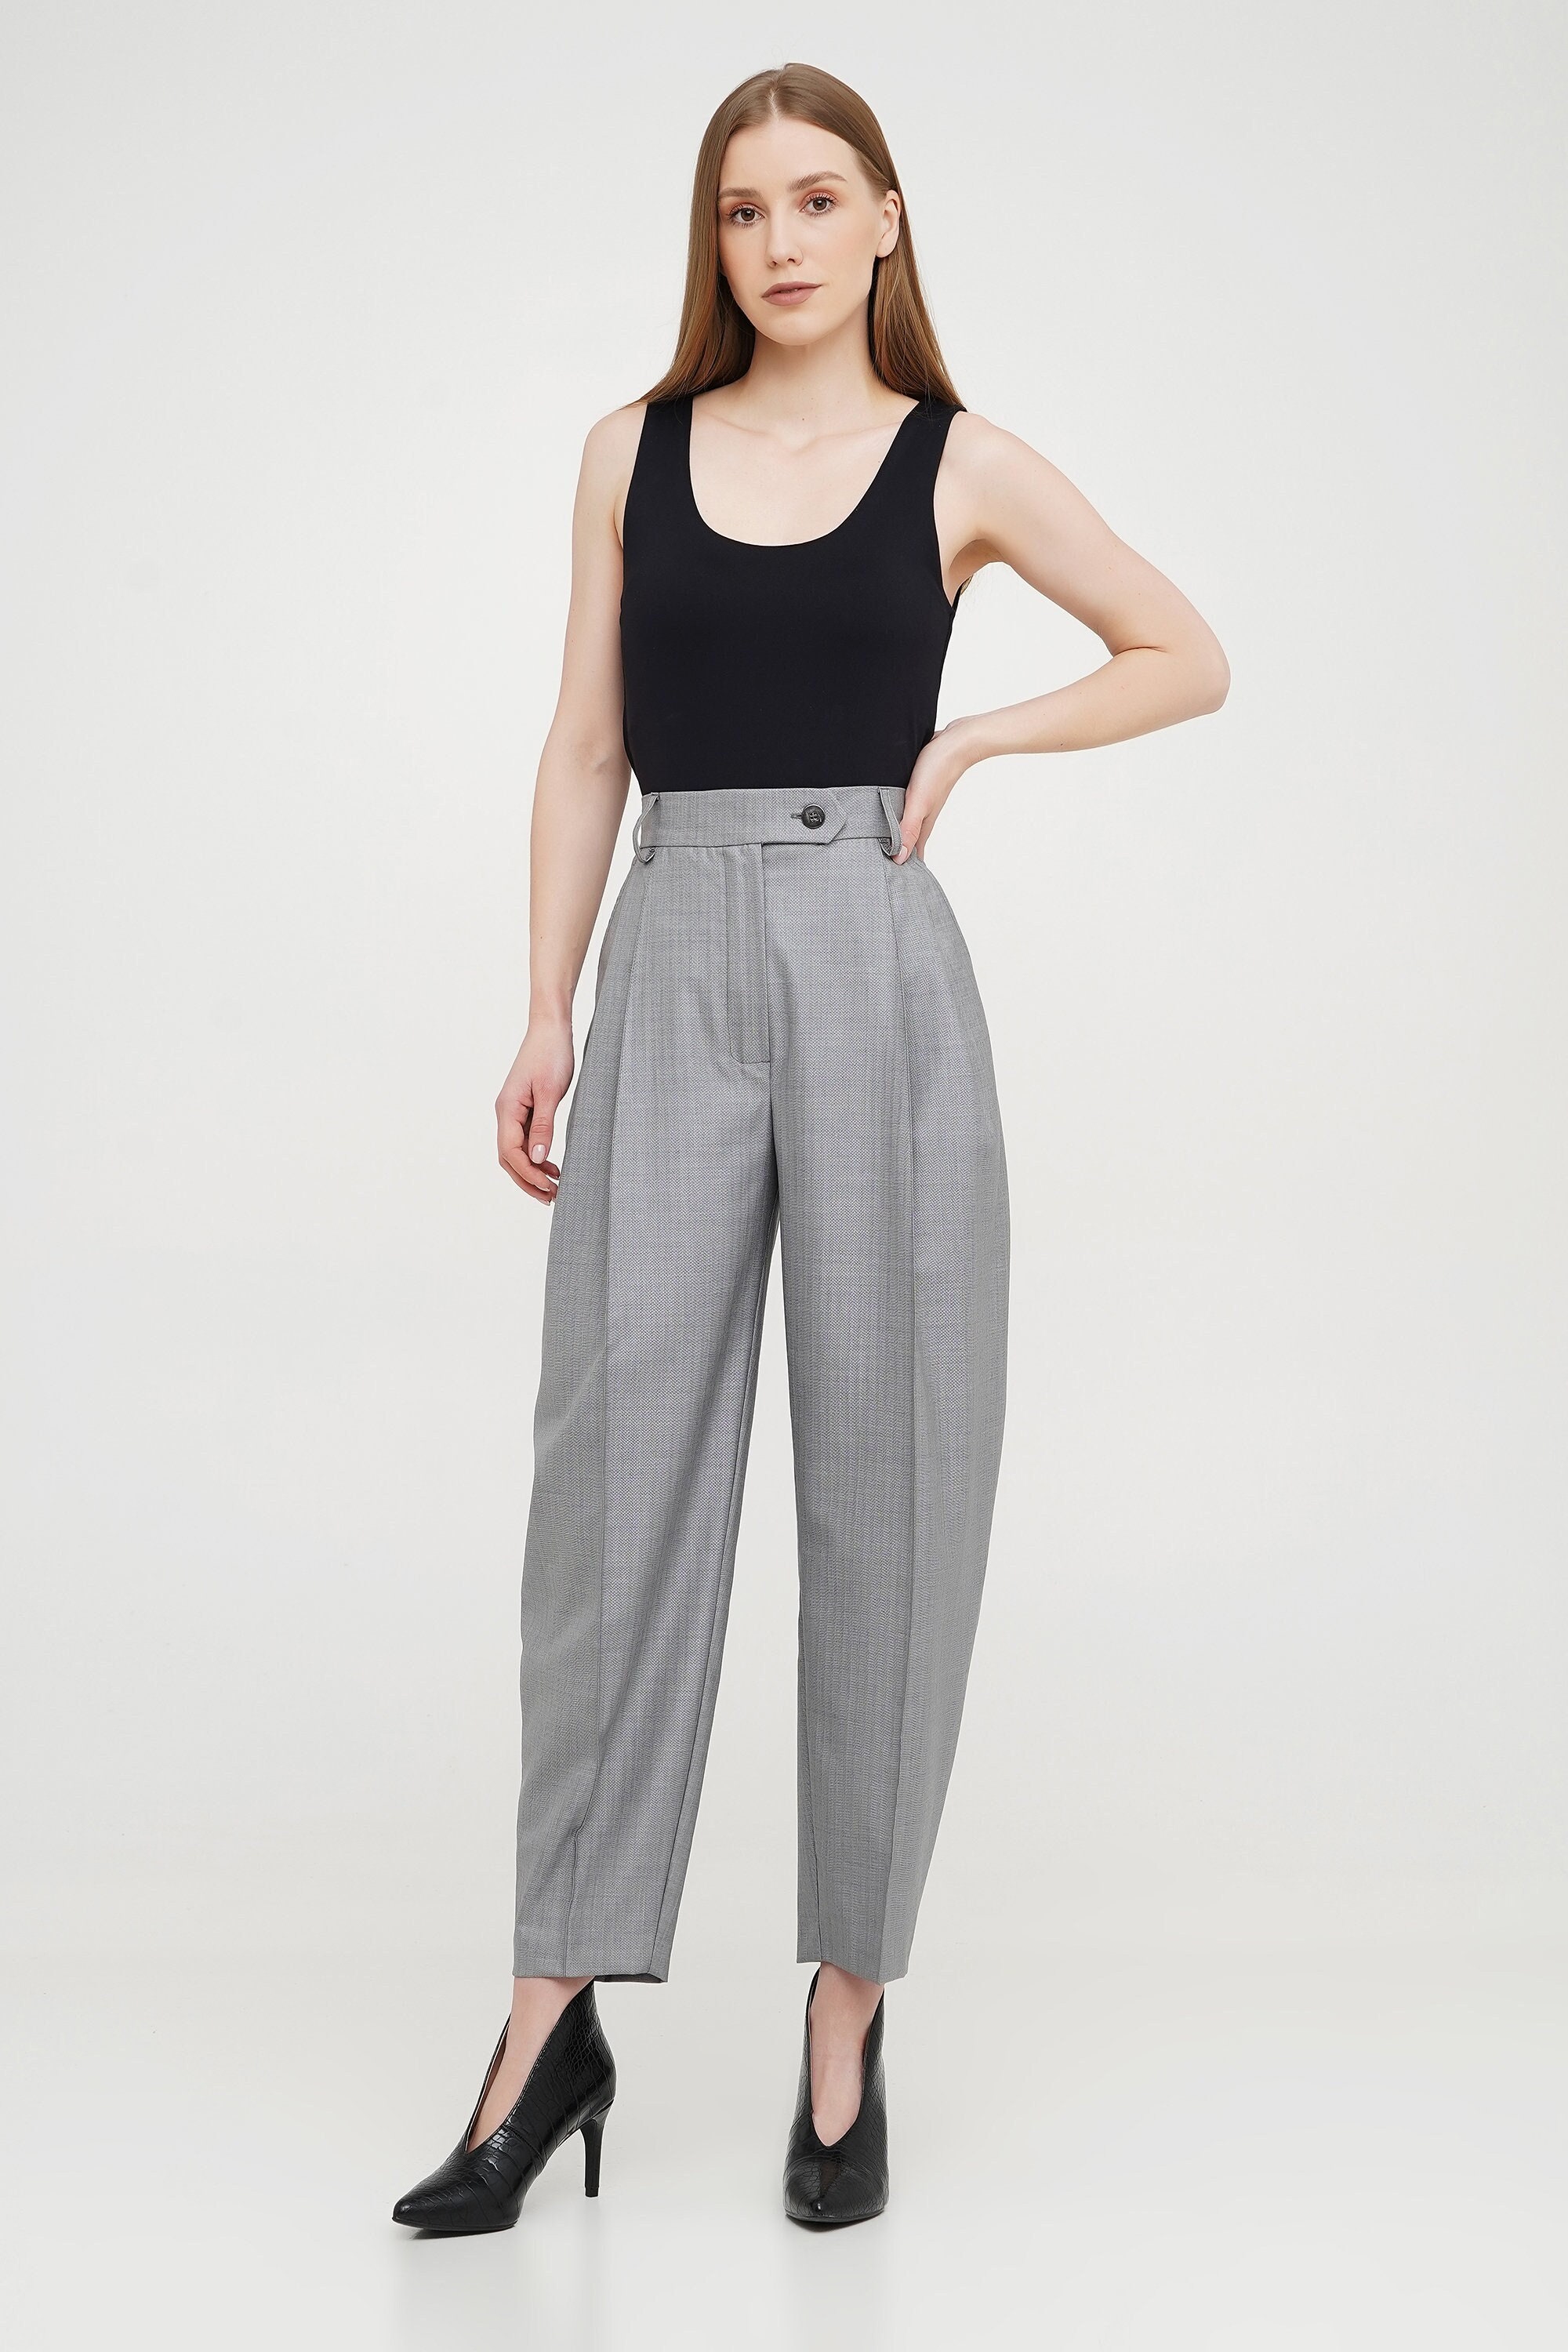 Women's Wool High Waist Pleated Pants, Tapered Pleat Trousers, Custom Made  Pants -  Canada